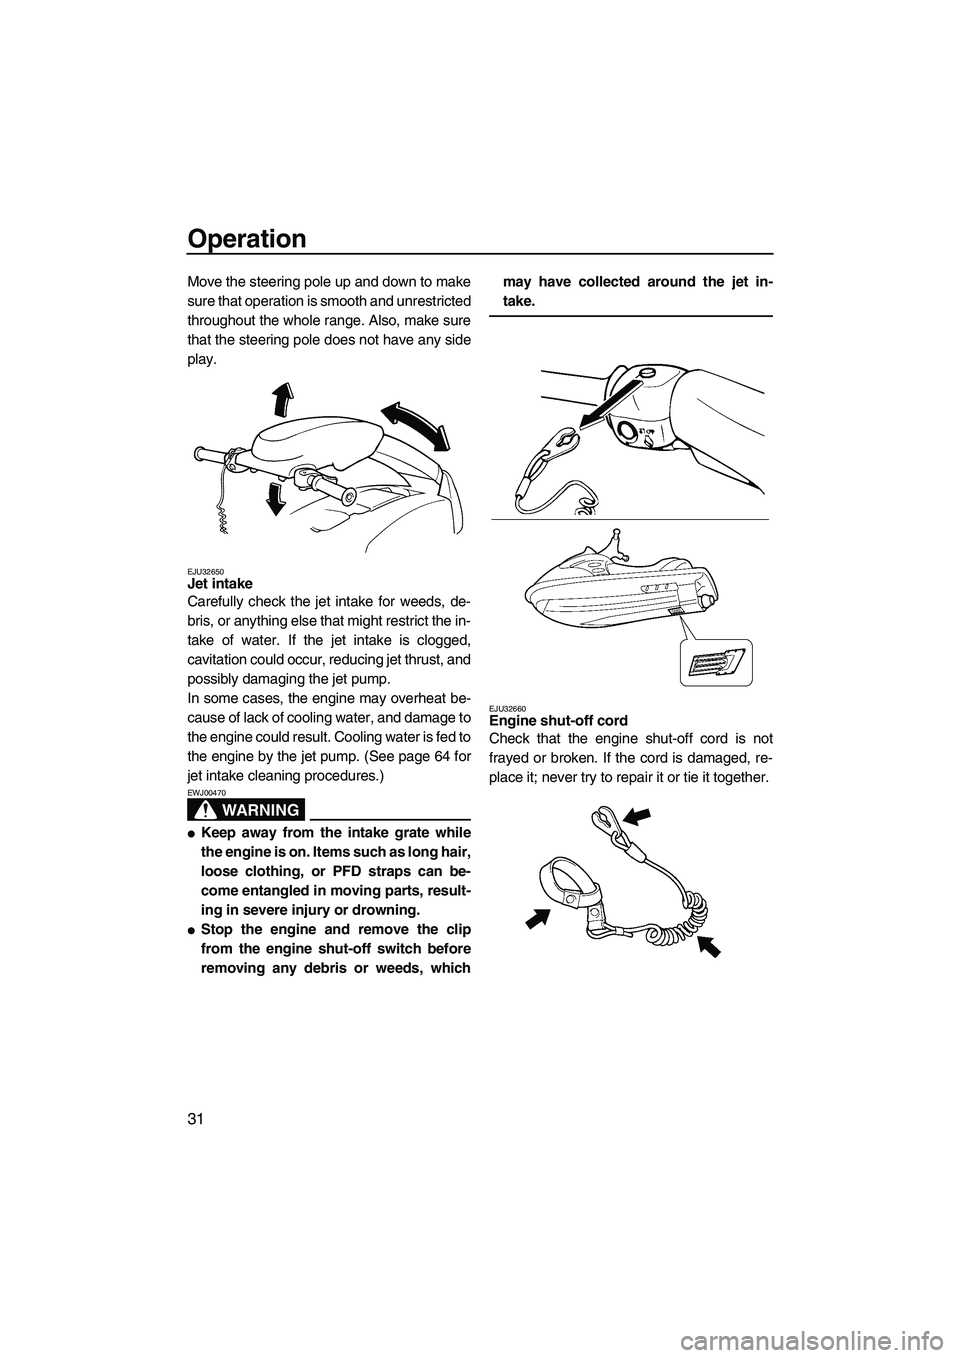 YAMAHA SUPERJET 2007 Owners Guide Operation
31
Move the steering pole up and down to make
sure that operation is smooth and unrestricted
throughout the whole range. Also, make sure
that the steering pole does not have any side
play.
E